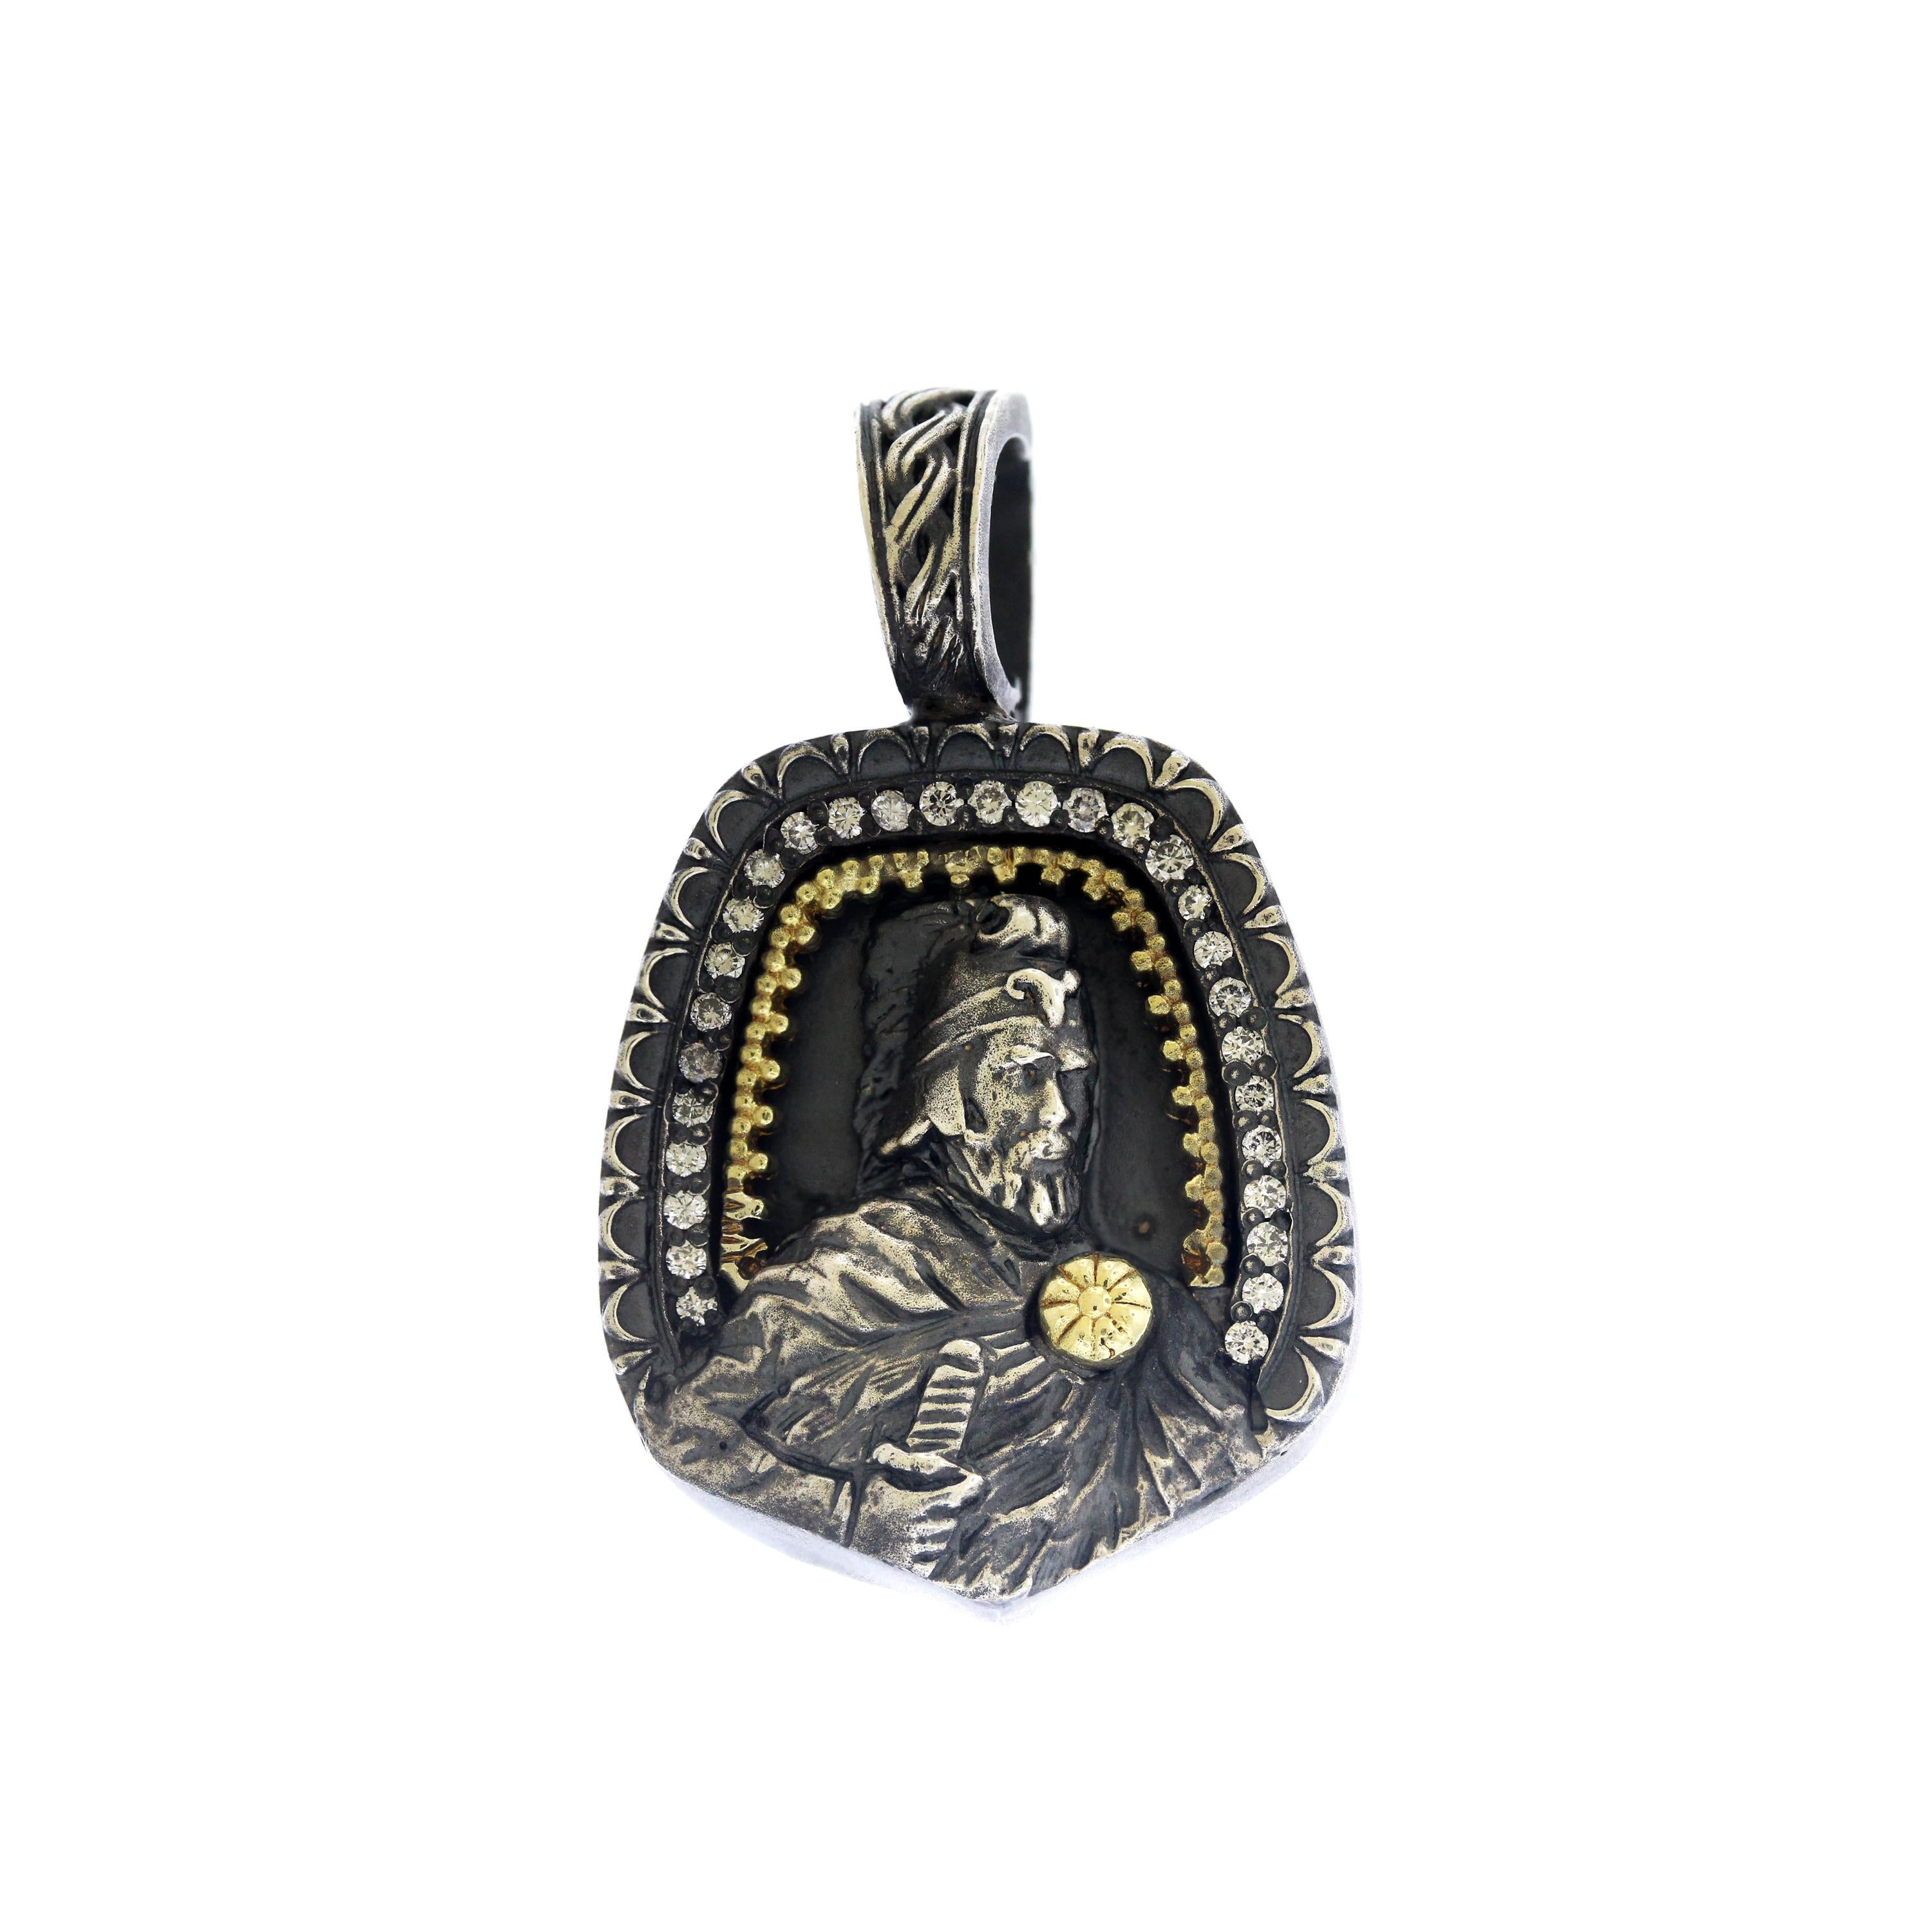 IF YOU ARE REALLY INTERESTED, CONTACT US WITH ANY REASONABLE OFFER. WE WILL TRY OUR BEST TO MAKE YOU HAPPY!

Aged Silver & 18K Gold and Diamond Warrior Pendant with Mesh Chain Necklace by Stambolian

This pendant features an Armenian warrior in the